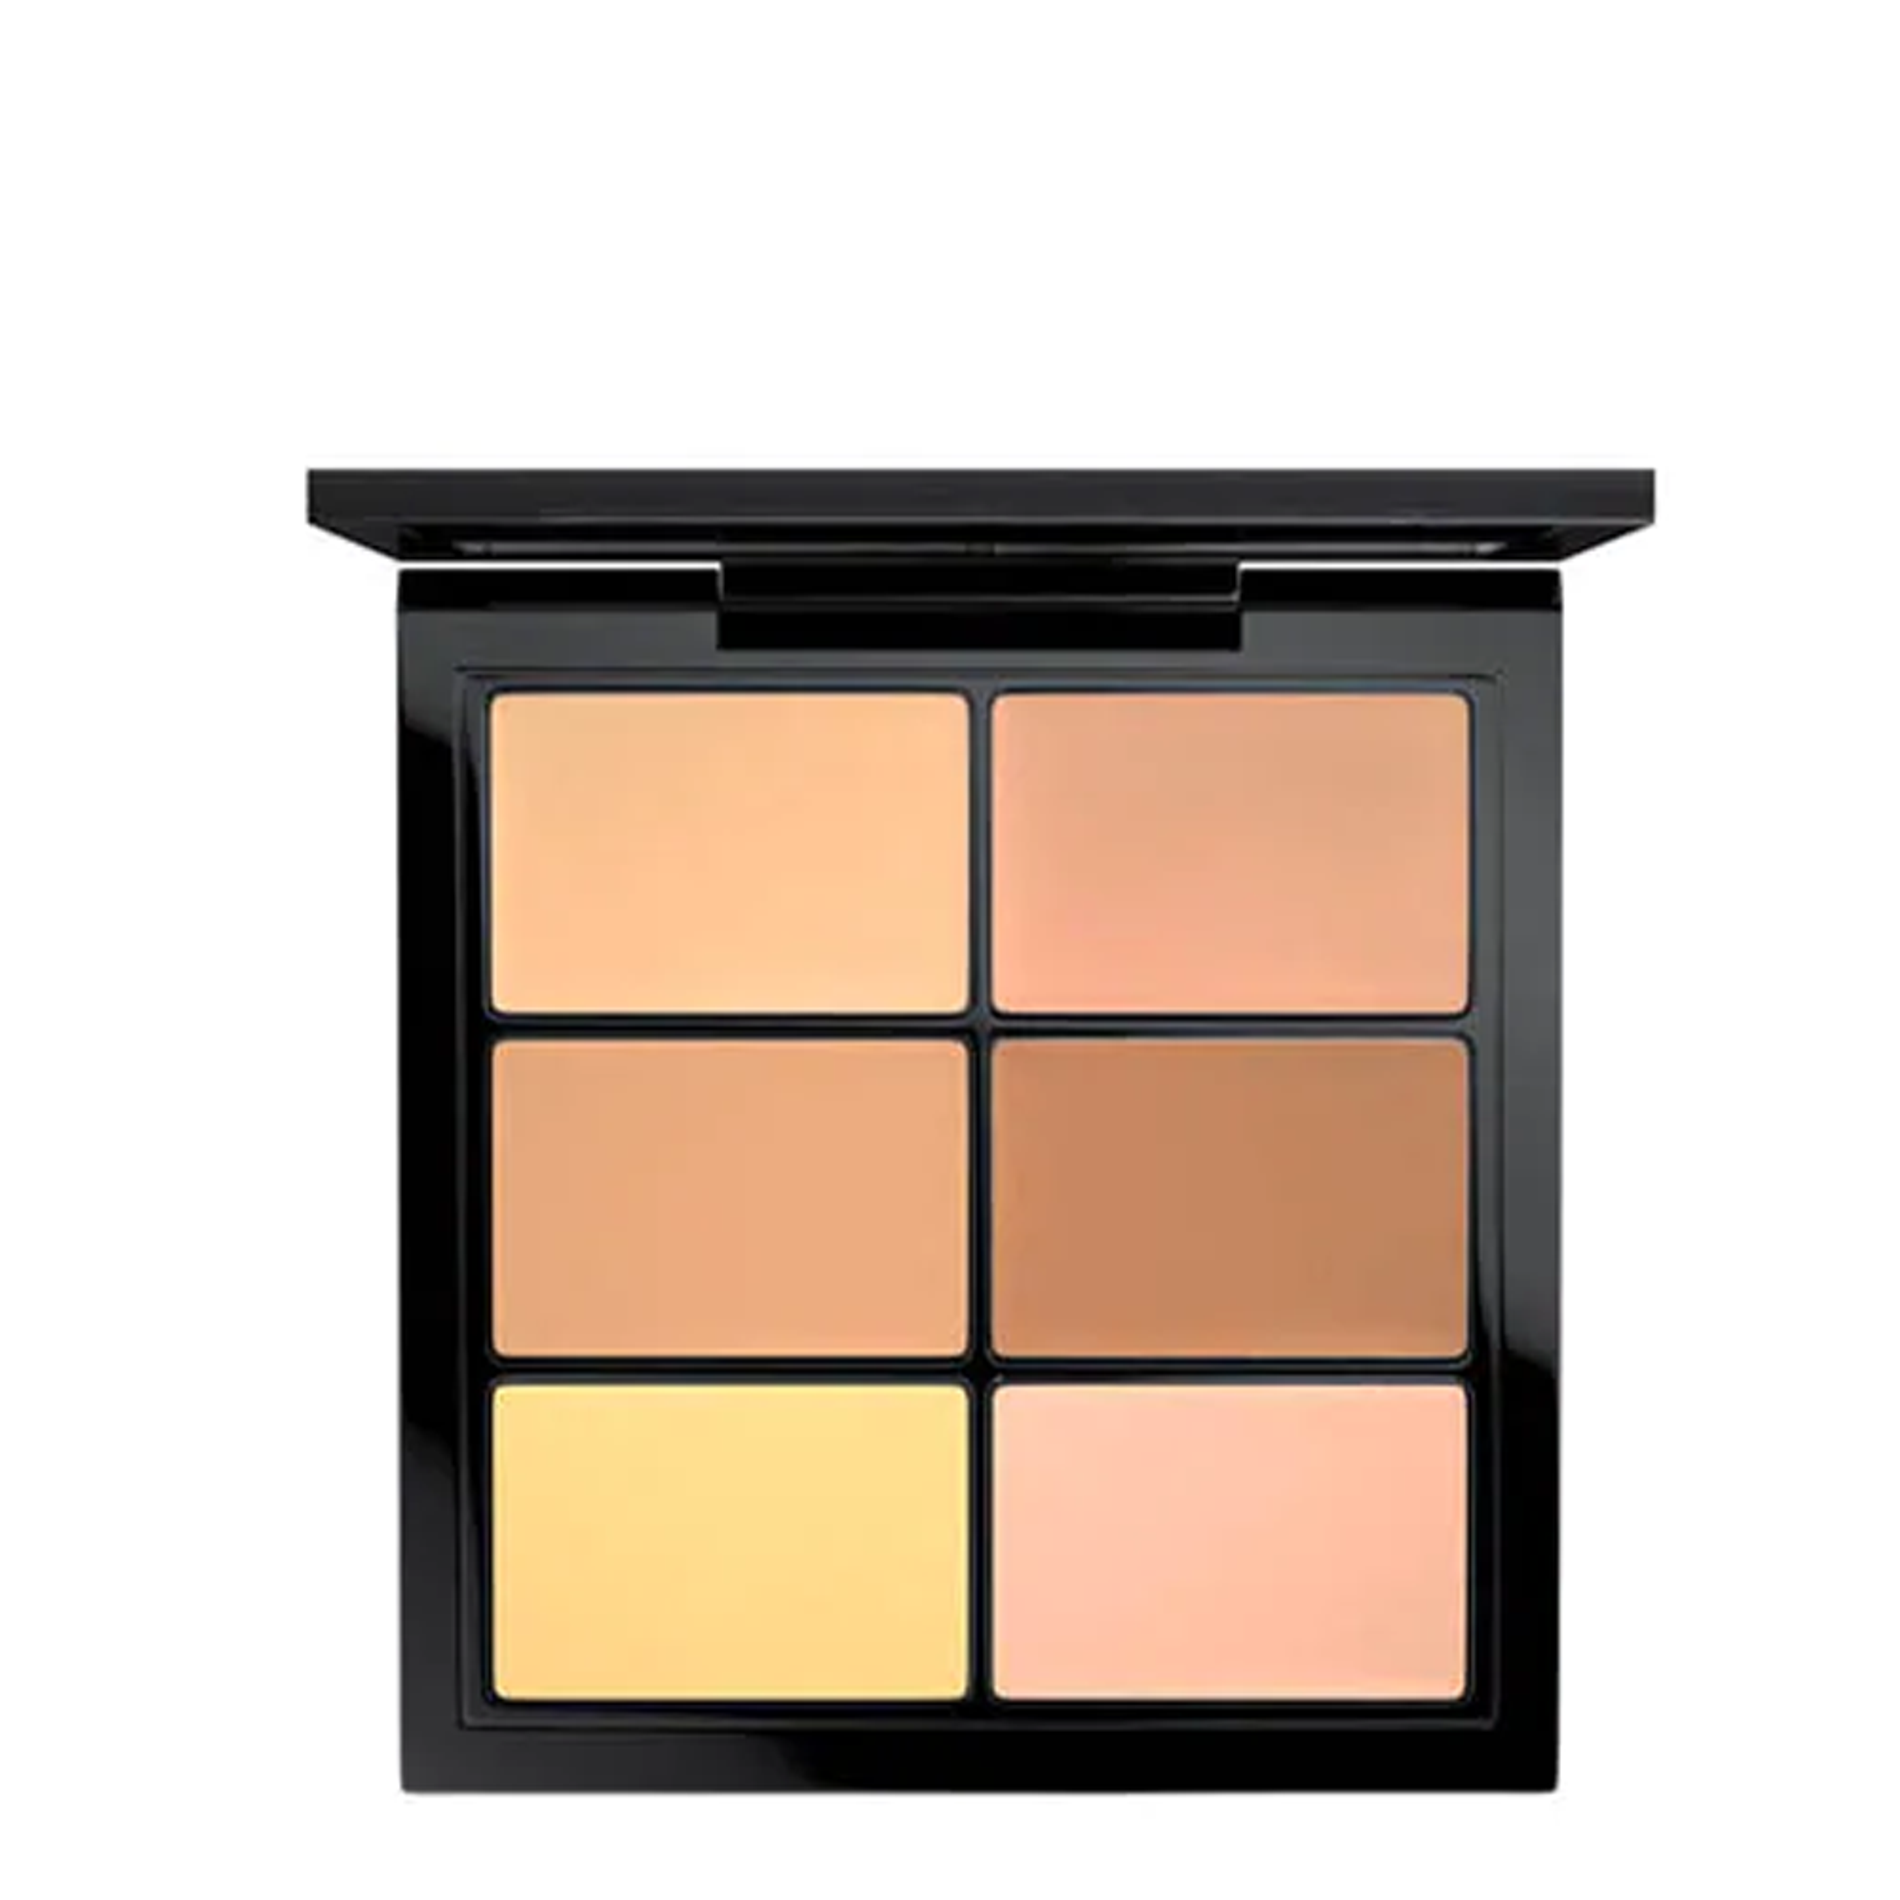 bang-che-khuyet-diem-mac-studio-conceal-and-correct-palette-6g-9